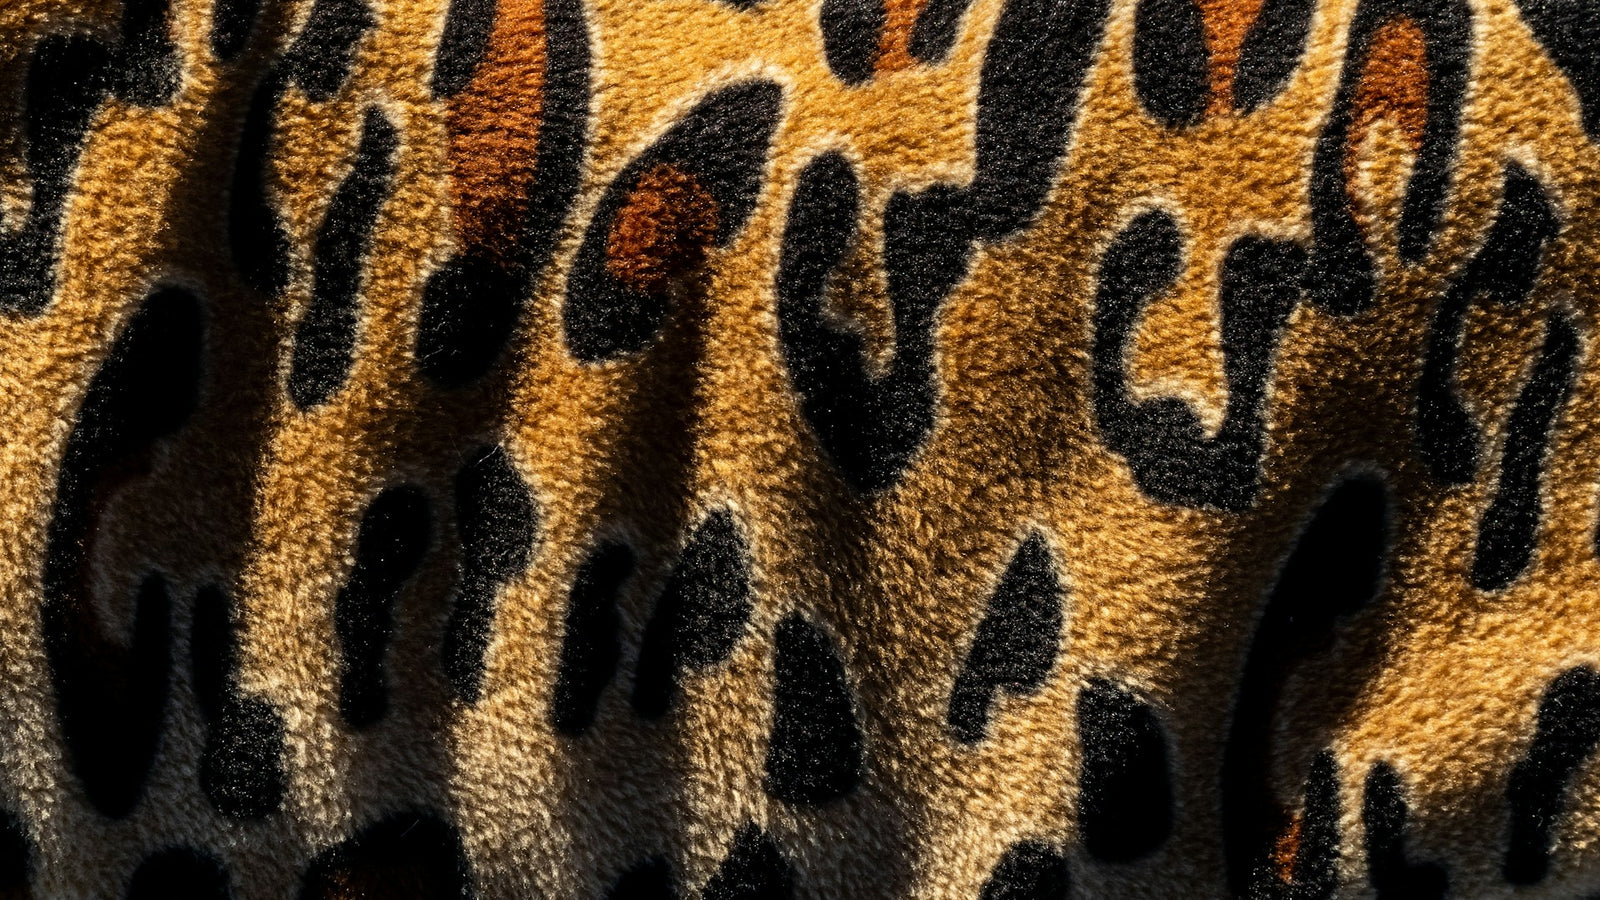 Cheetah Print Phone Case by Blanc Space: Stylish Protection for Your Device